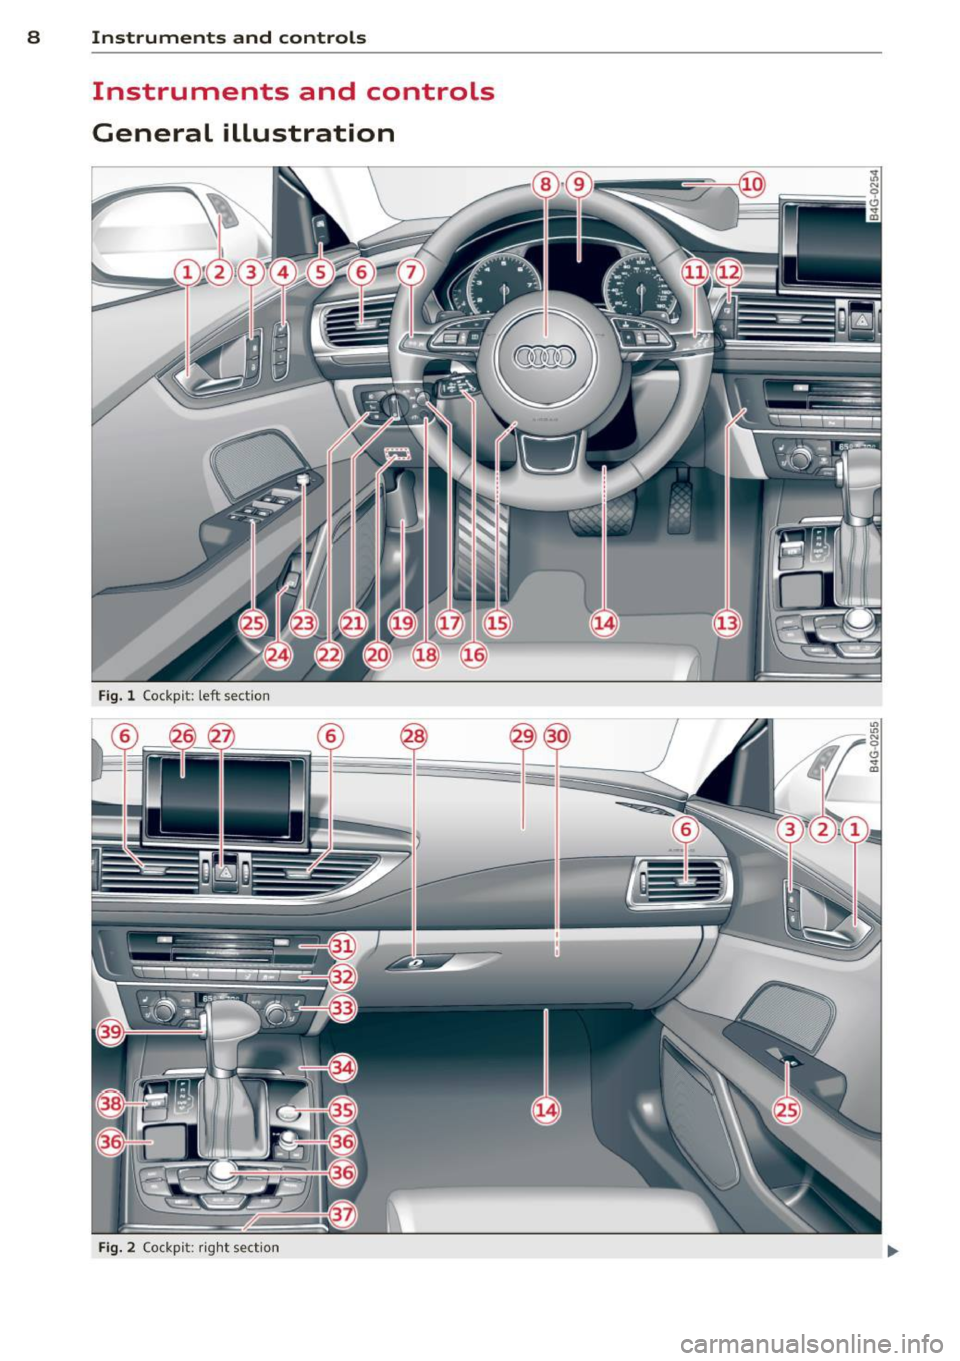 AUDI A7 2014  Owners Manual 8  Instruments and controls 
Instruments  and  controls 
General  illustration 
Fig. l Cockp it:  left  sect io n 
Fig. 2 Co ck pi t: ri ght  sect io n  